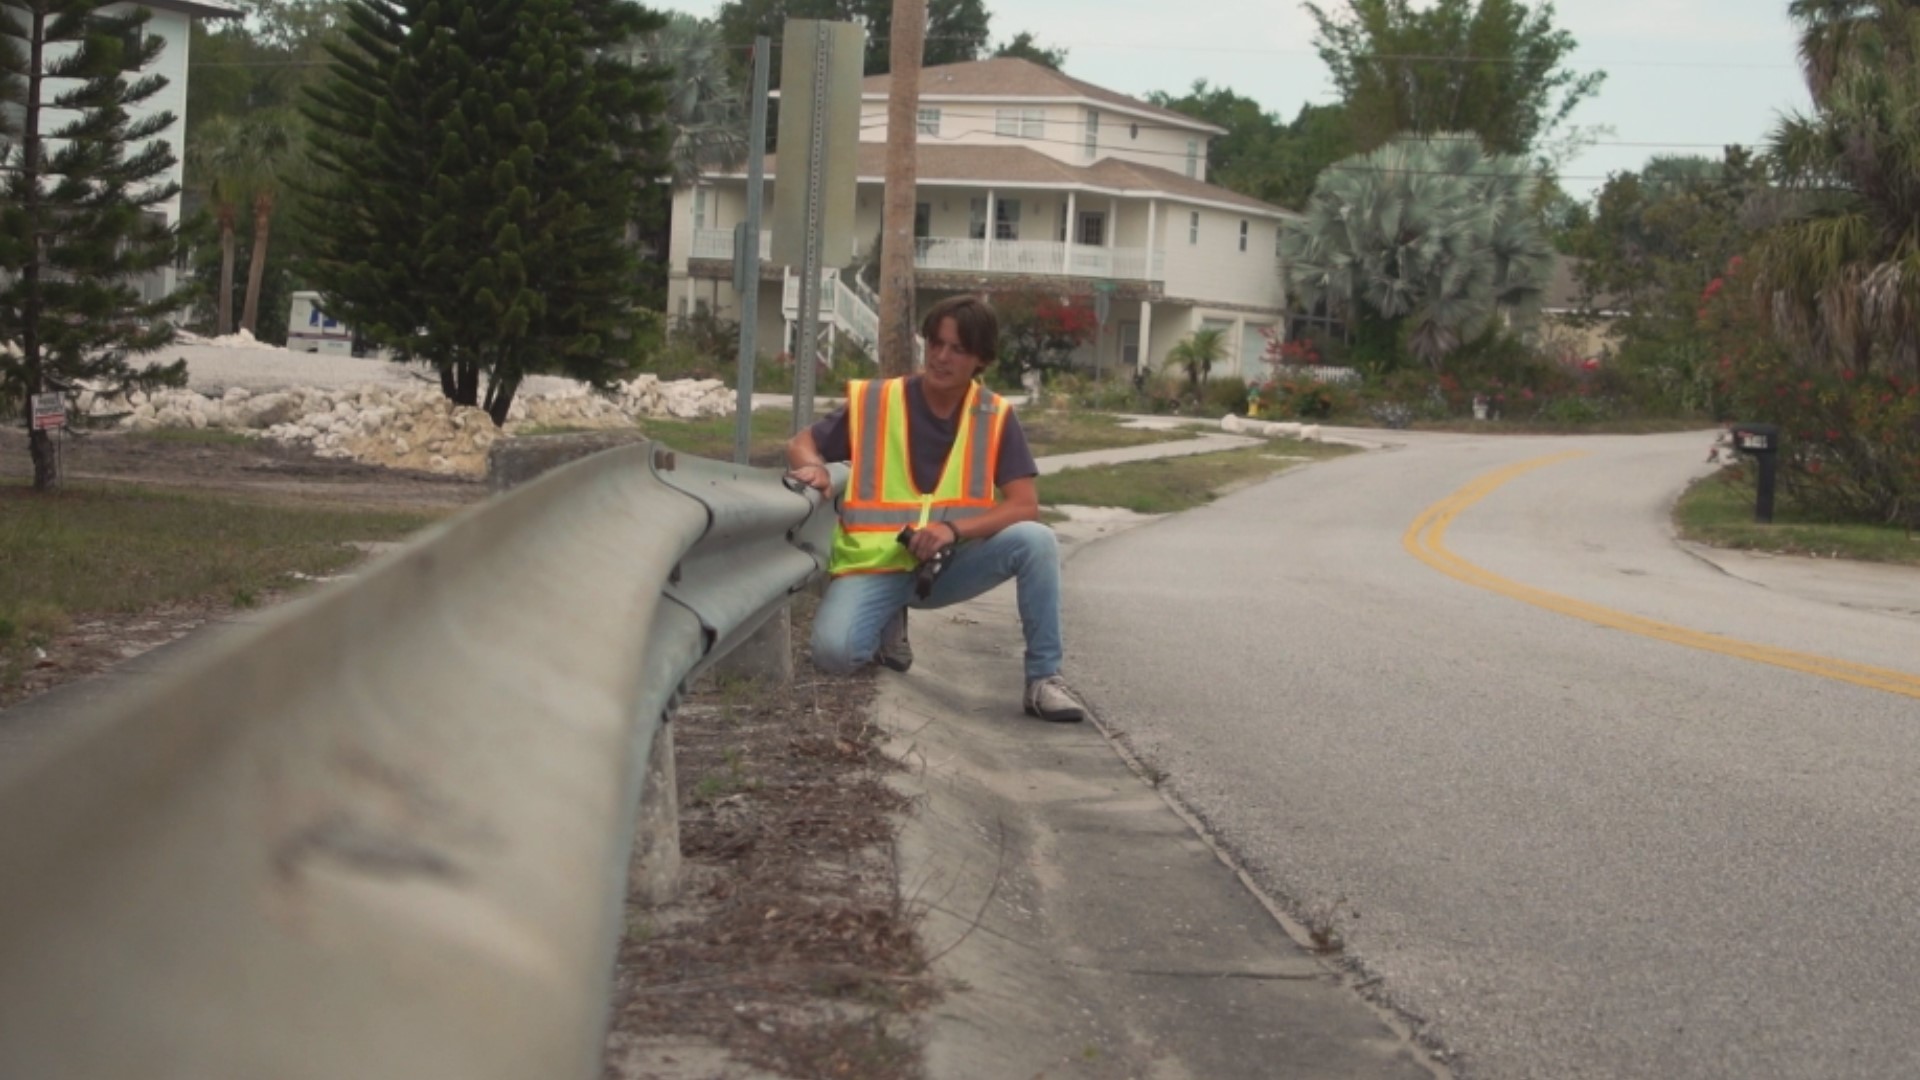 10 Tampa Bay has been investigating improperly installed guardrails across the state.